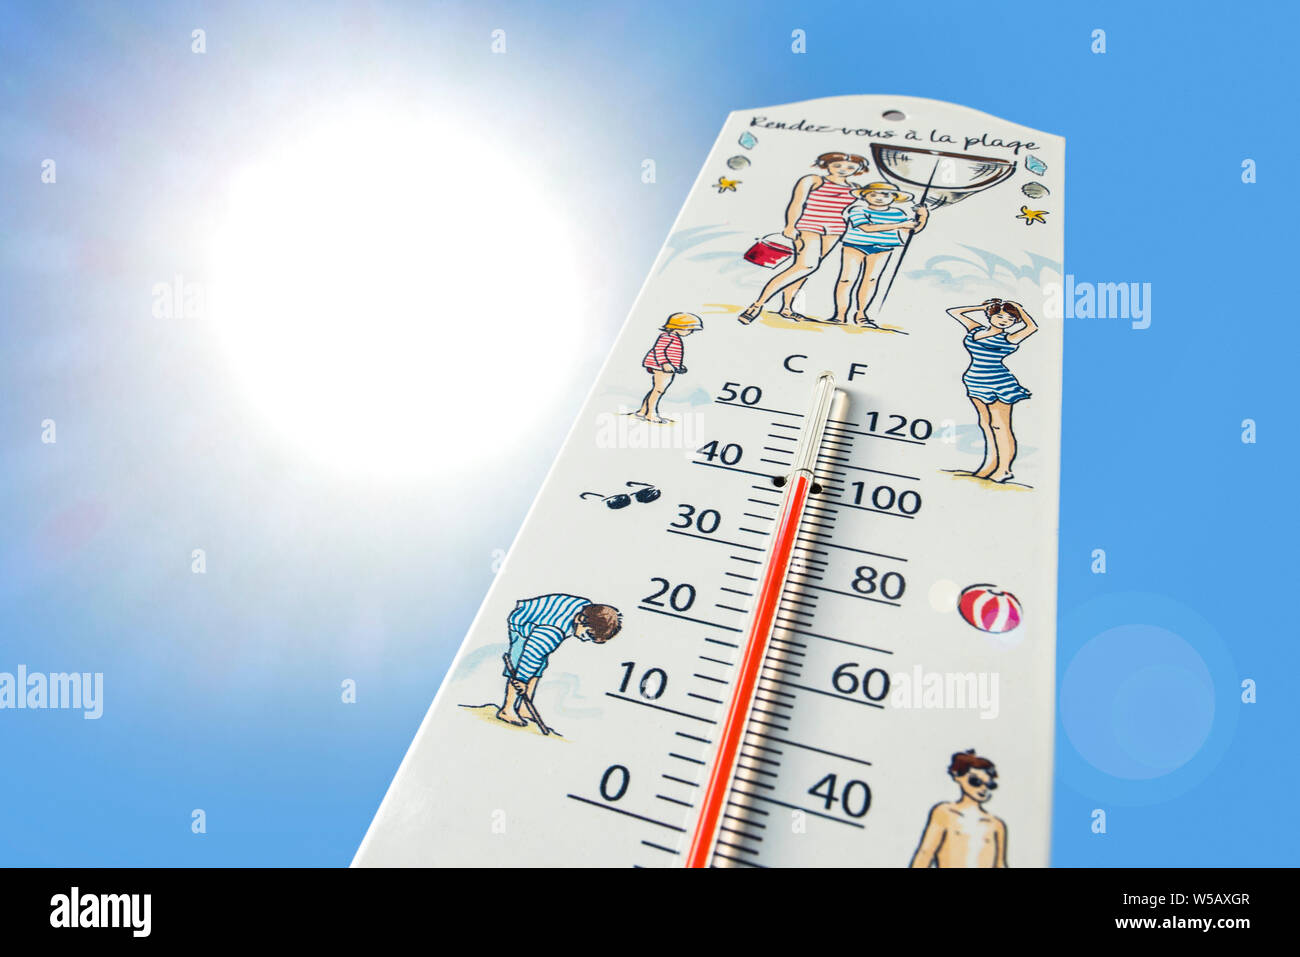 Worm's-eye view of thermometer measures extremely hot temperature of 40 degrees Celsius / 40 °C / 40°C / 100 °F during heatwave / heat wave in summer Stock Photo